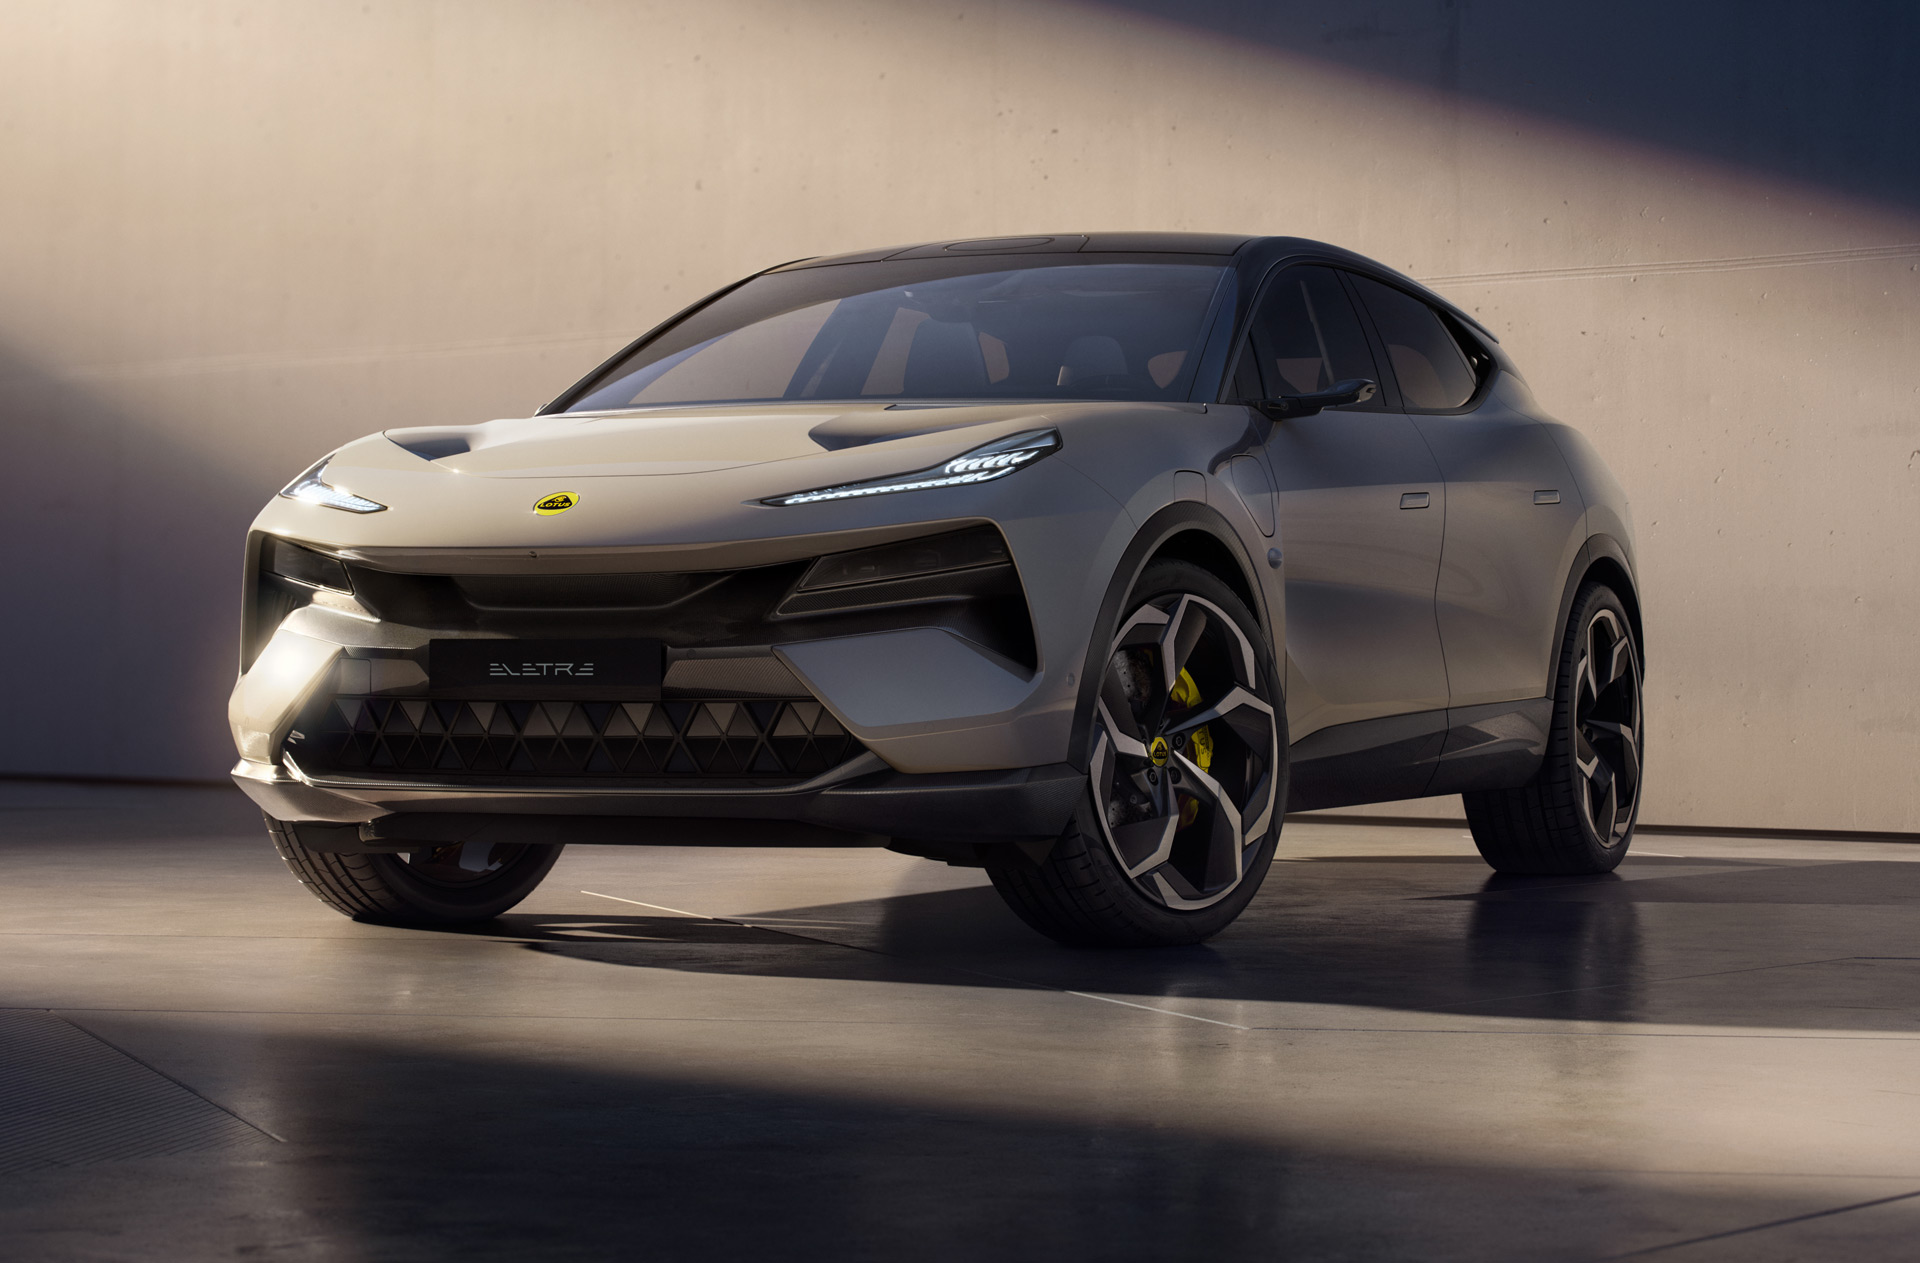 Ford Fiesta to Be Dropped, A Closer Look at Lotus’ New Electric SUV, VW’s Upcoming Electric Performance Models, and More